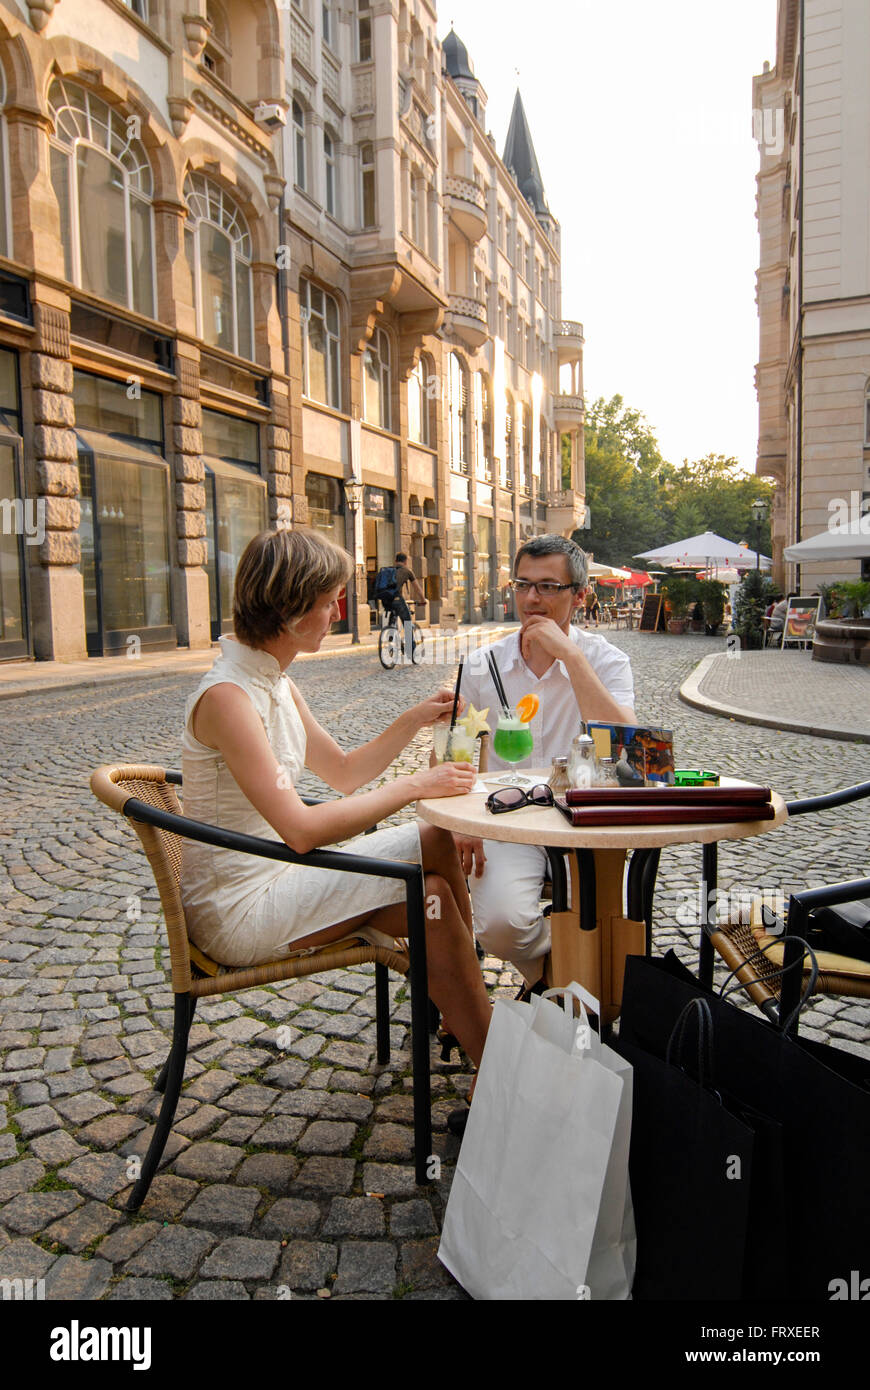 Couple in a pavement cafe, Barfussgaesschen, Leipzig, Saxony, Germany Stock Photo